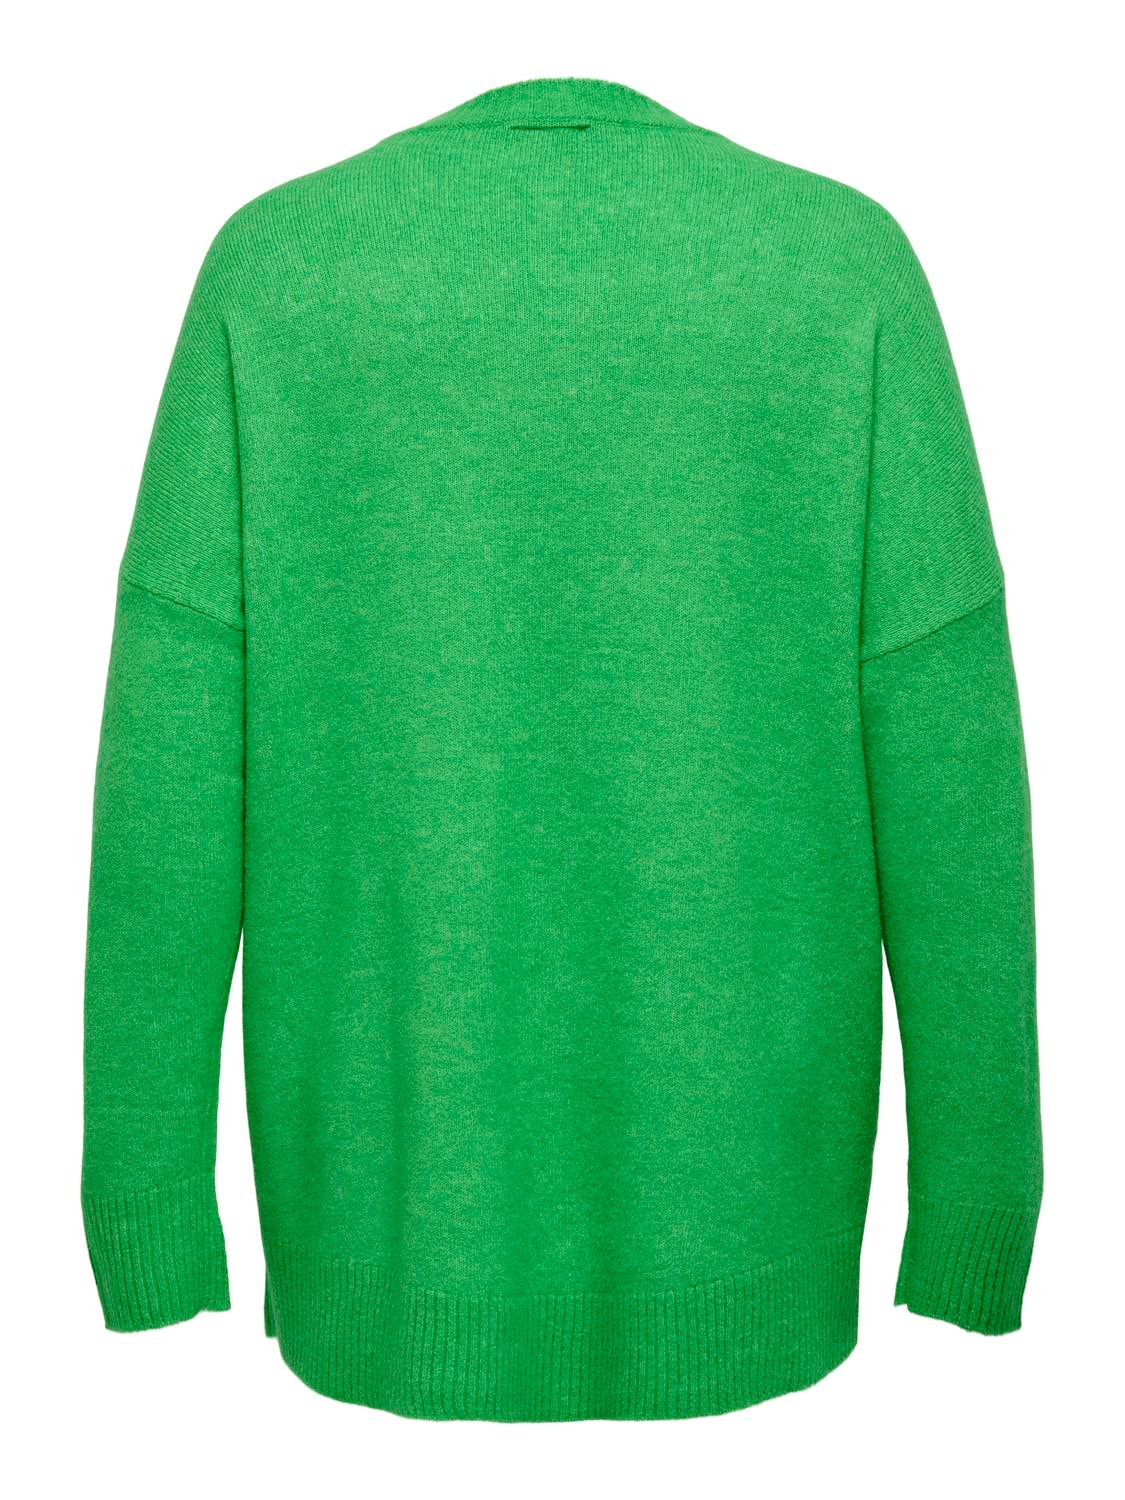 ONLY O-hals Curve Pullover -Island Green - 15296177